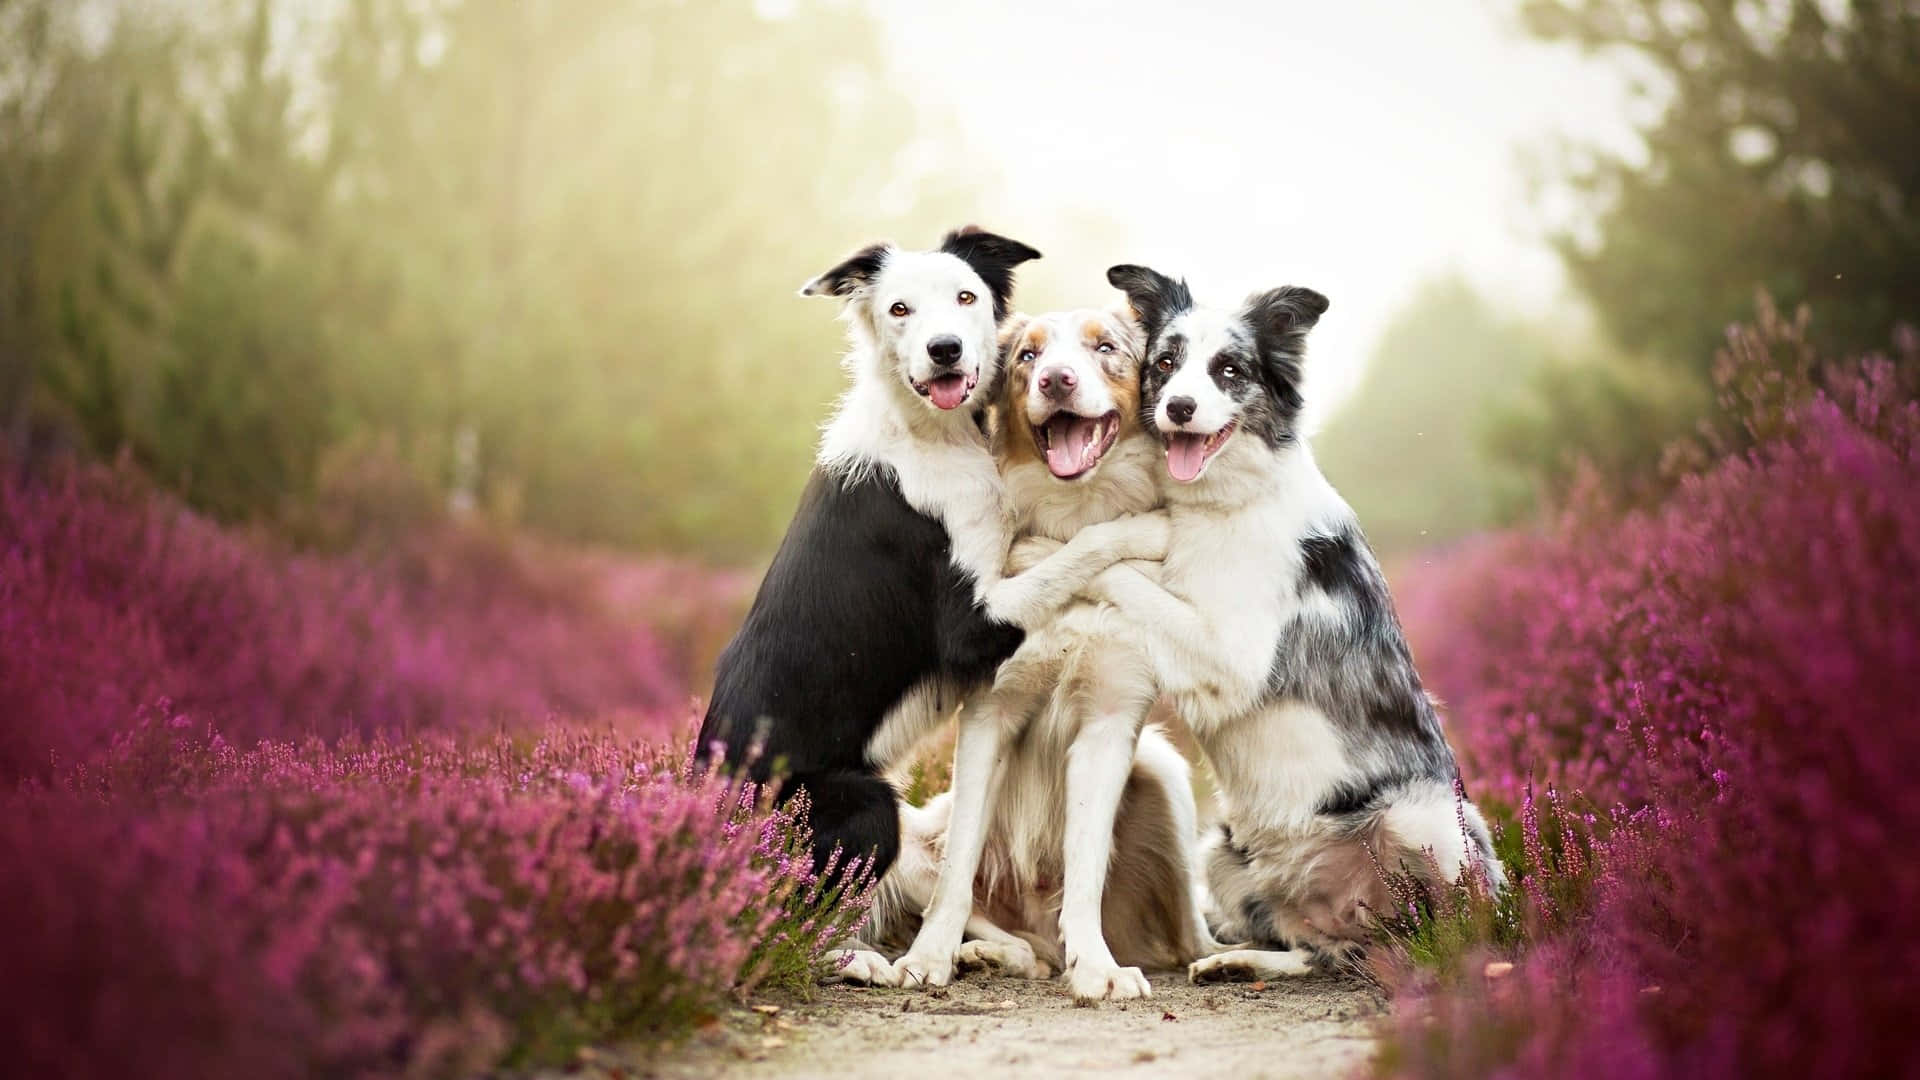 Three Dogs Hugging On A Path In The Forest Wallpaper